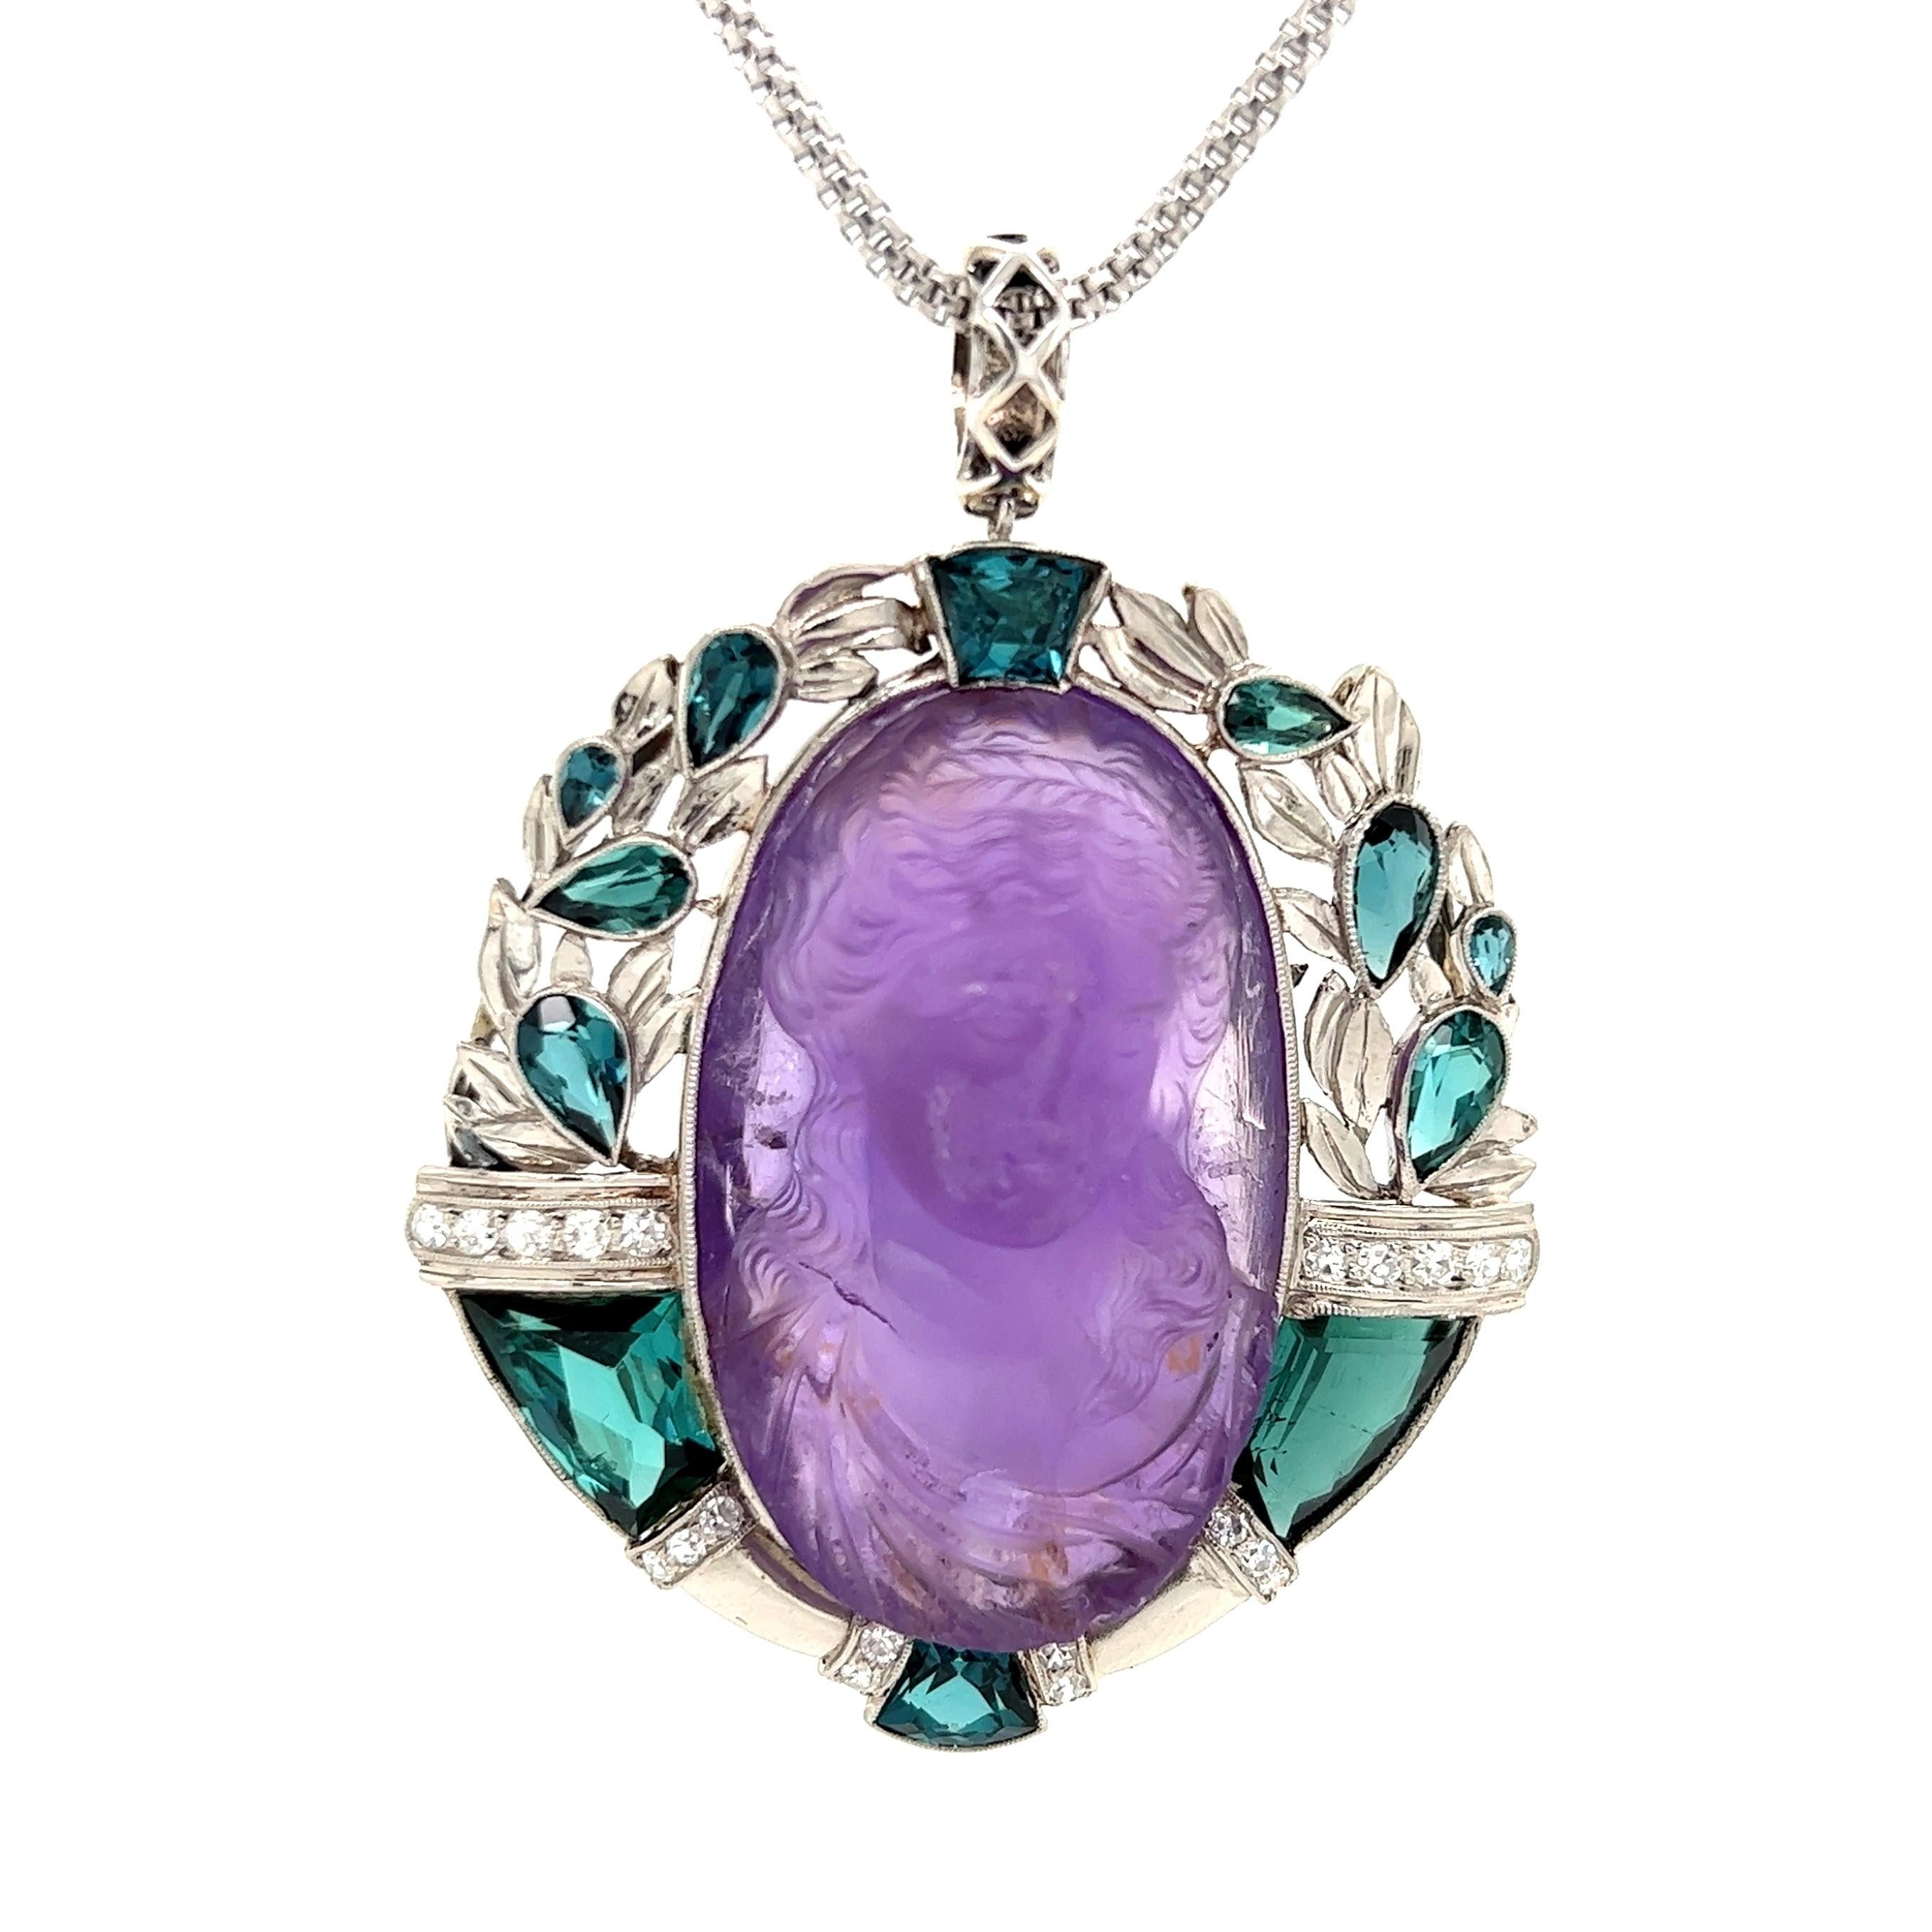 
Simply Beautiful! Captivating Carved Amethyst Medallion Pendant Necklace depicting a Beautiful Young Lady, Hand Carved in High Relief. Rendered with remarkable detail and warmth, so unusual to find! Securely Hand set in an Exquisite Hand crafted